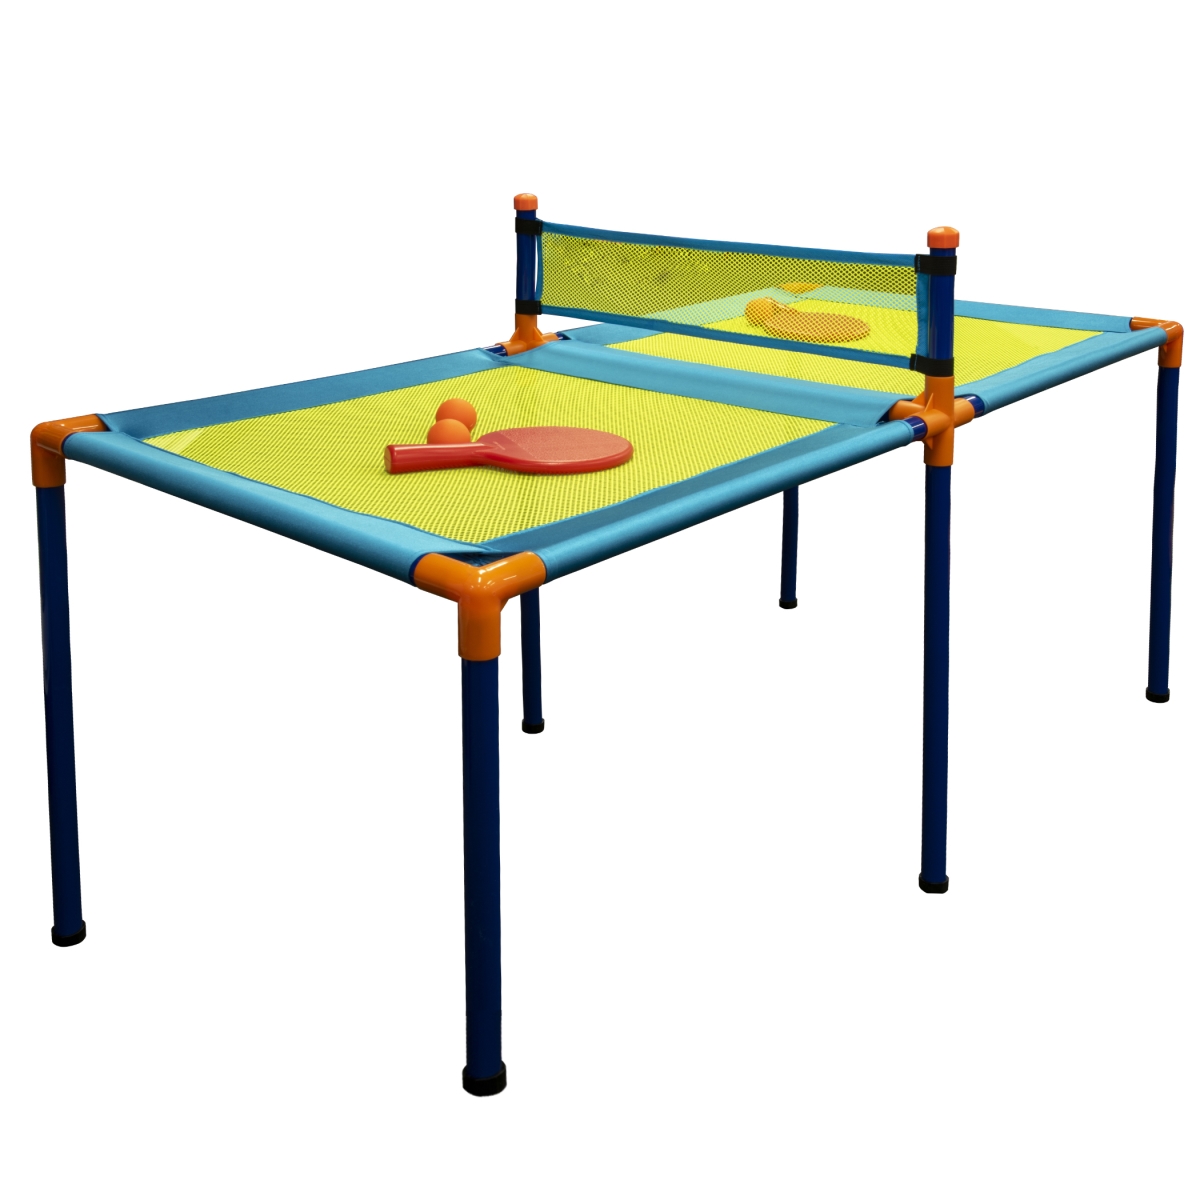 Picture of AojI AJ2155-2PPM 51 in. Paddle Ball Table Set, Multi Color